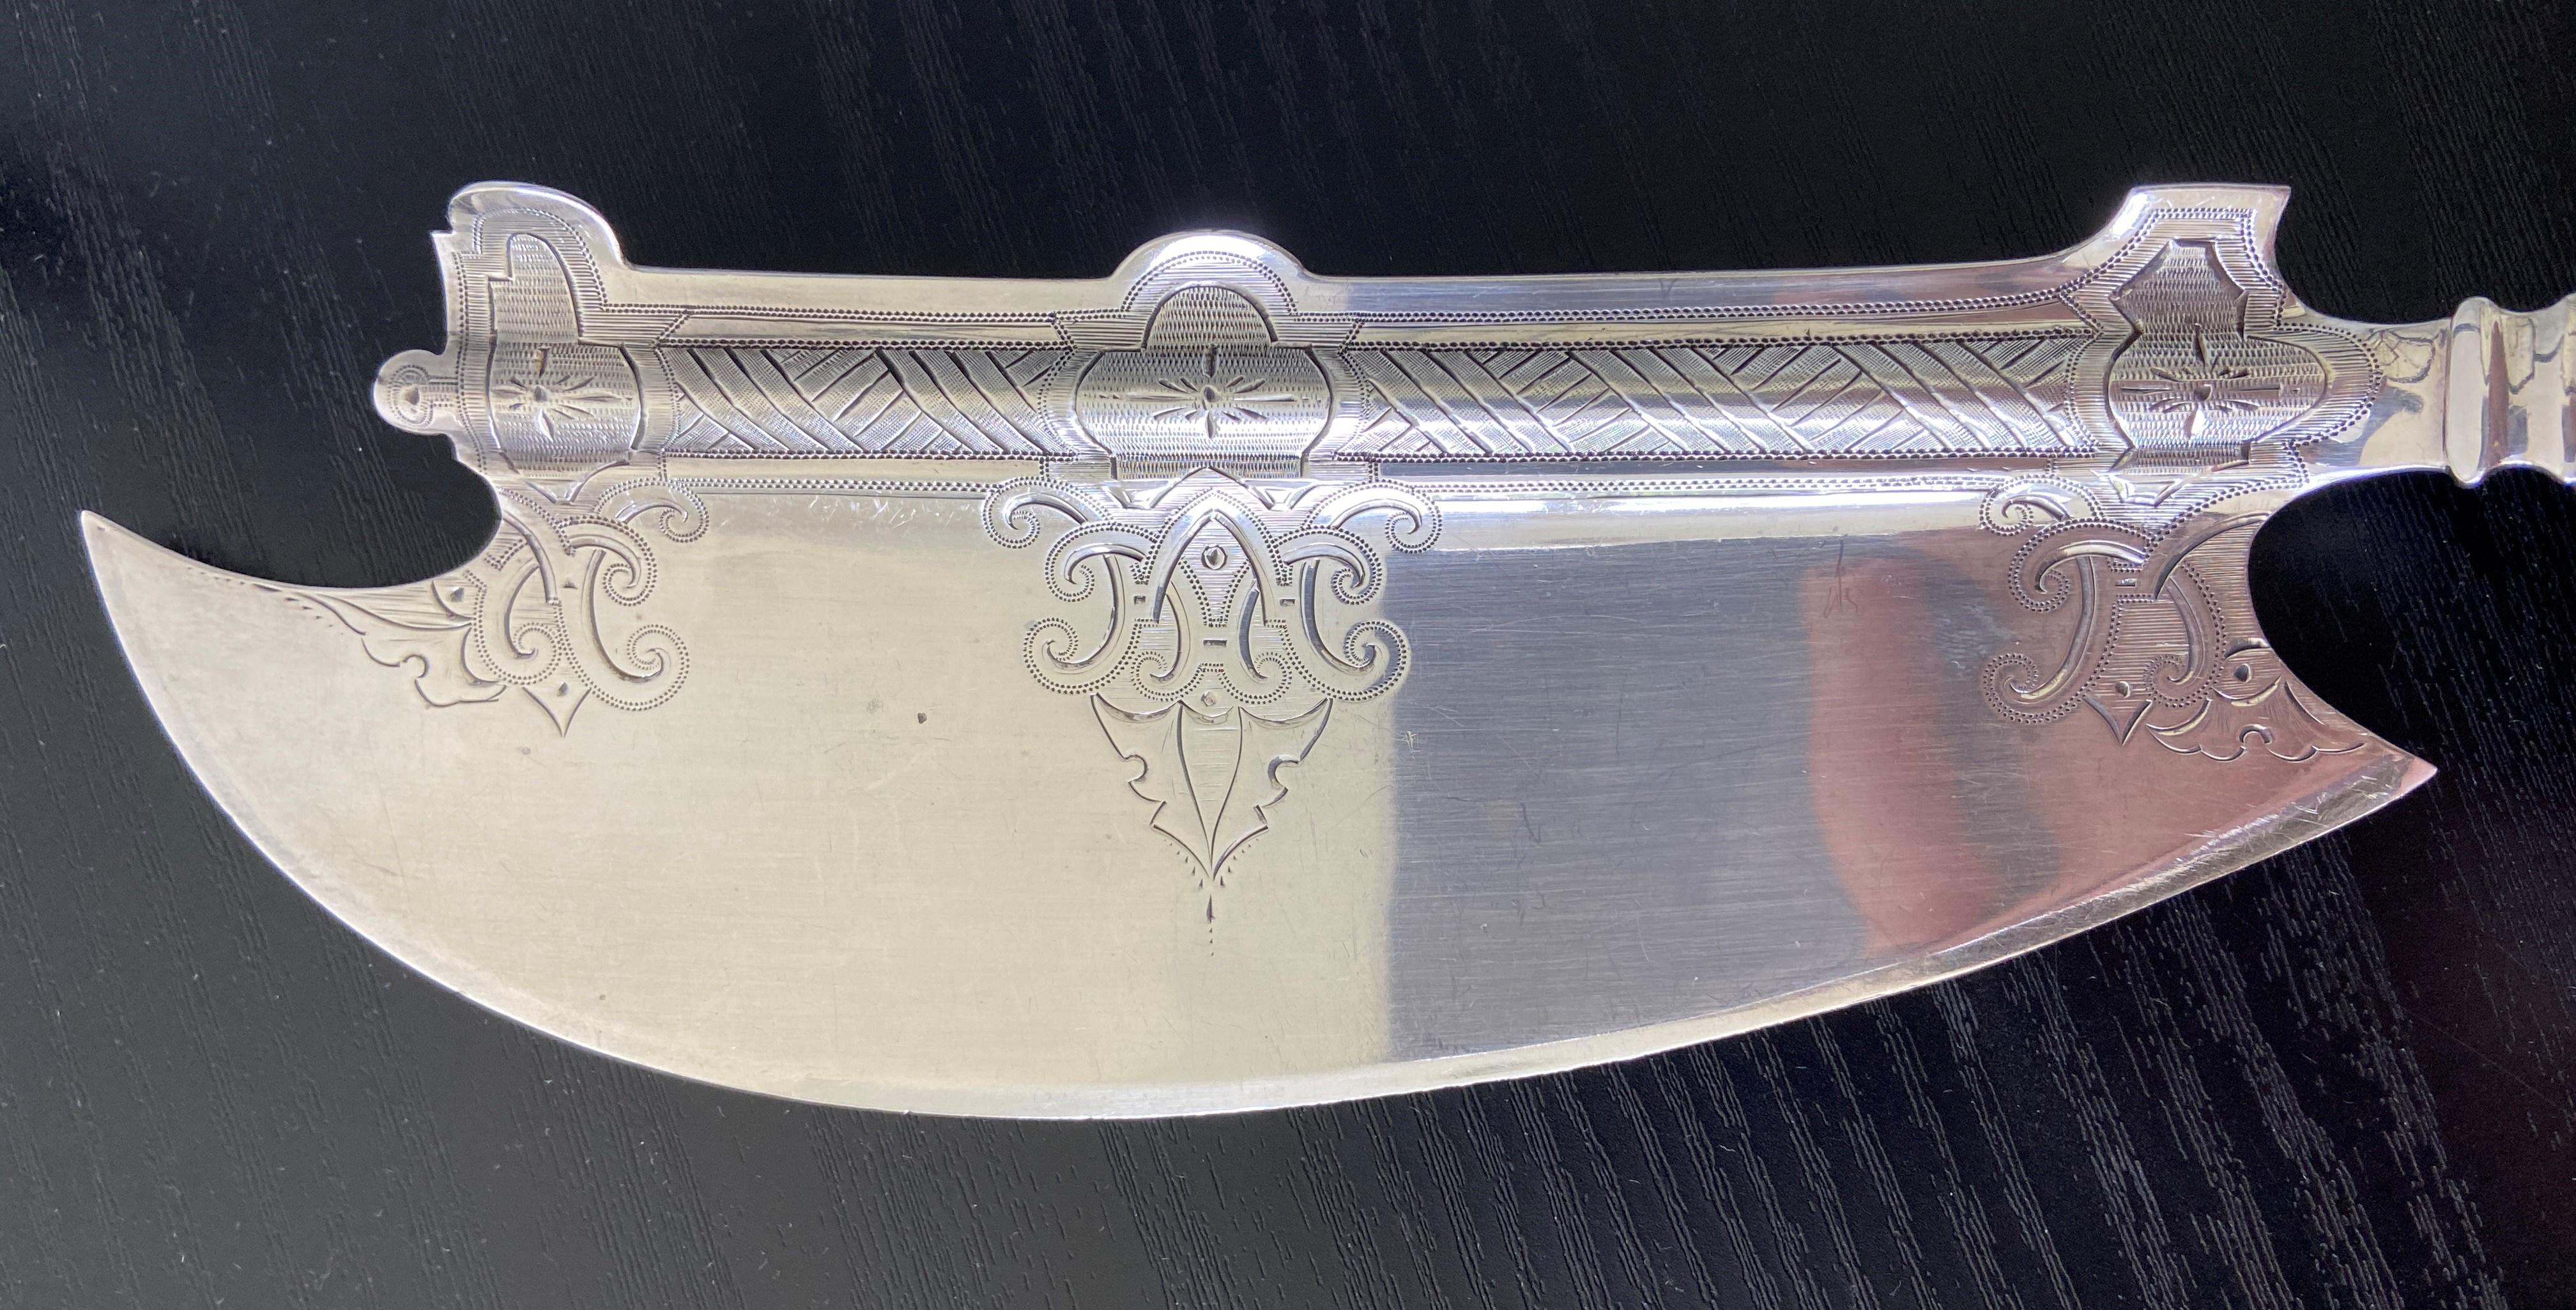 This stunning serving piece from the 